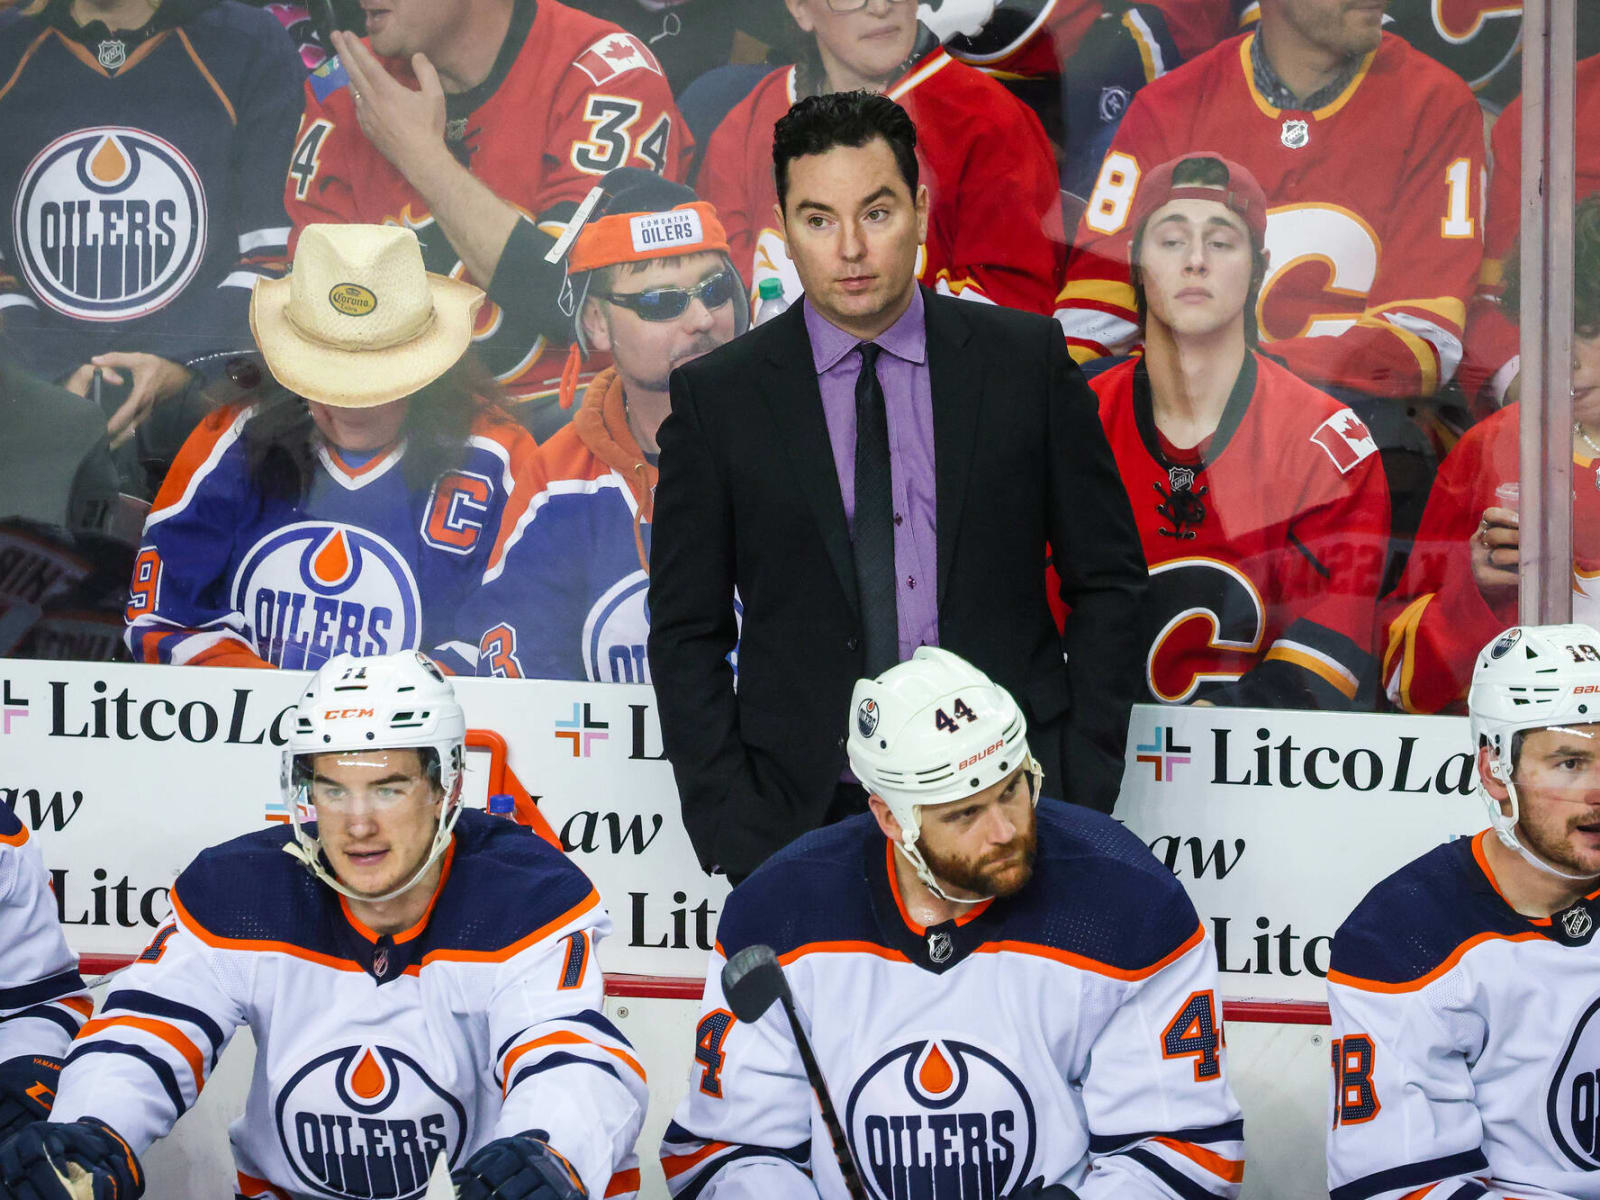 Edmonton Oilers coach Jay Woodcroft stands behind the bench during